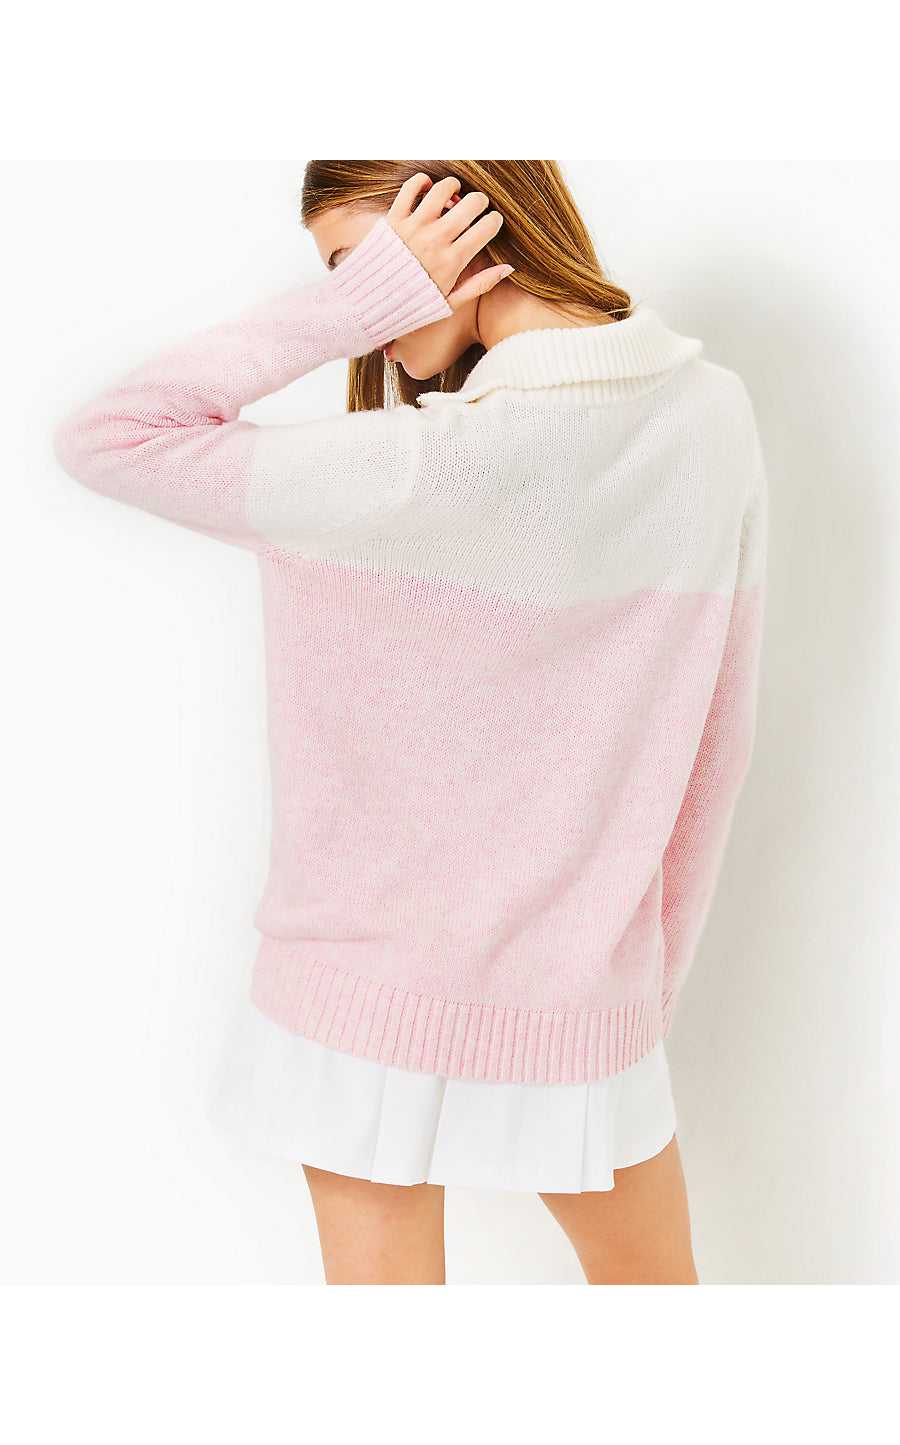 DORSET SWEATER, PASTEL CONFETTI PINK ON THE COURT COLORBLOCK